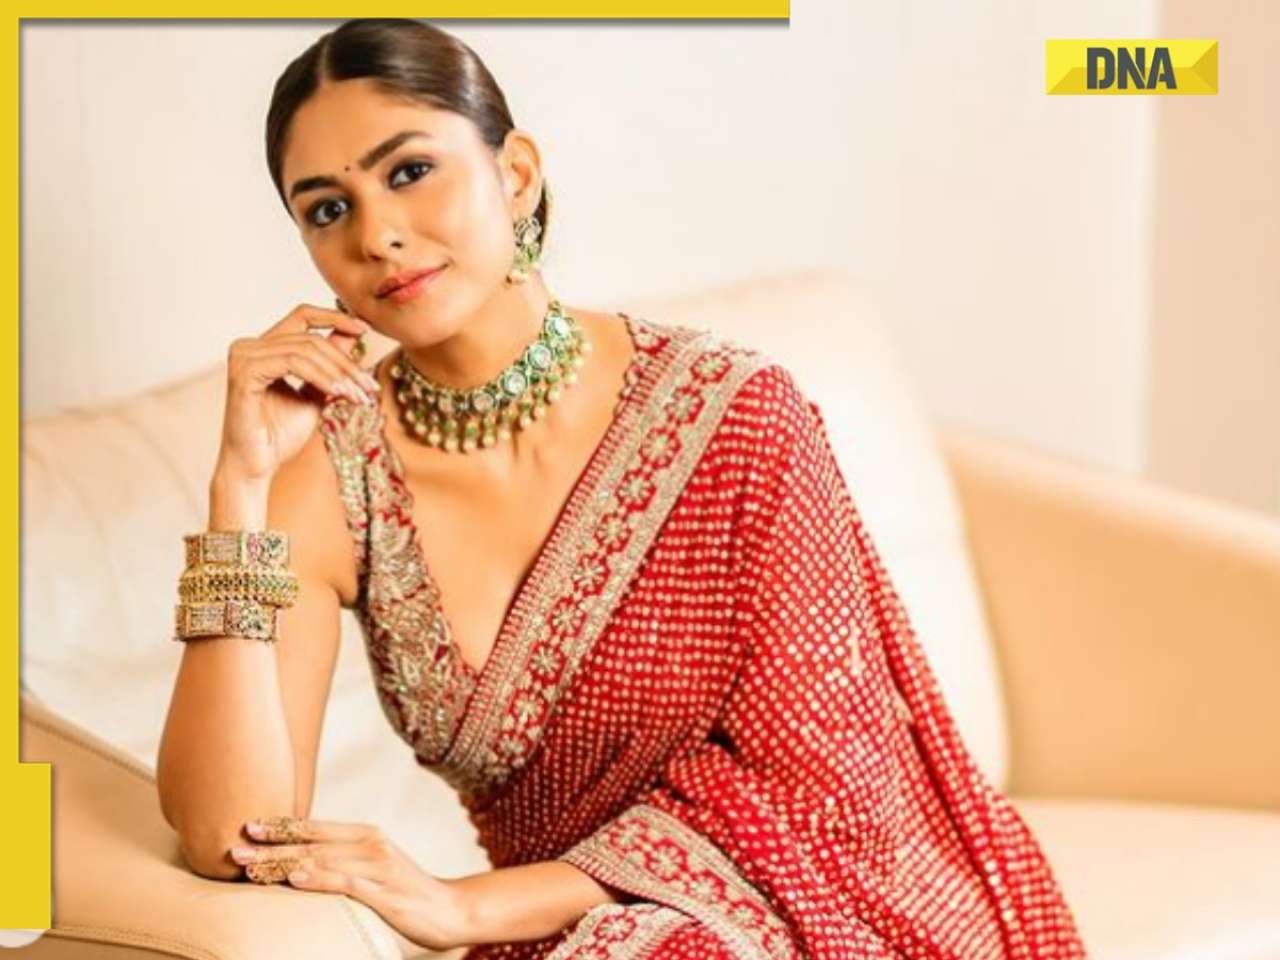 Mrunal Thakur says relationships are tough, considers freezing her eggs: 'It's important to...'